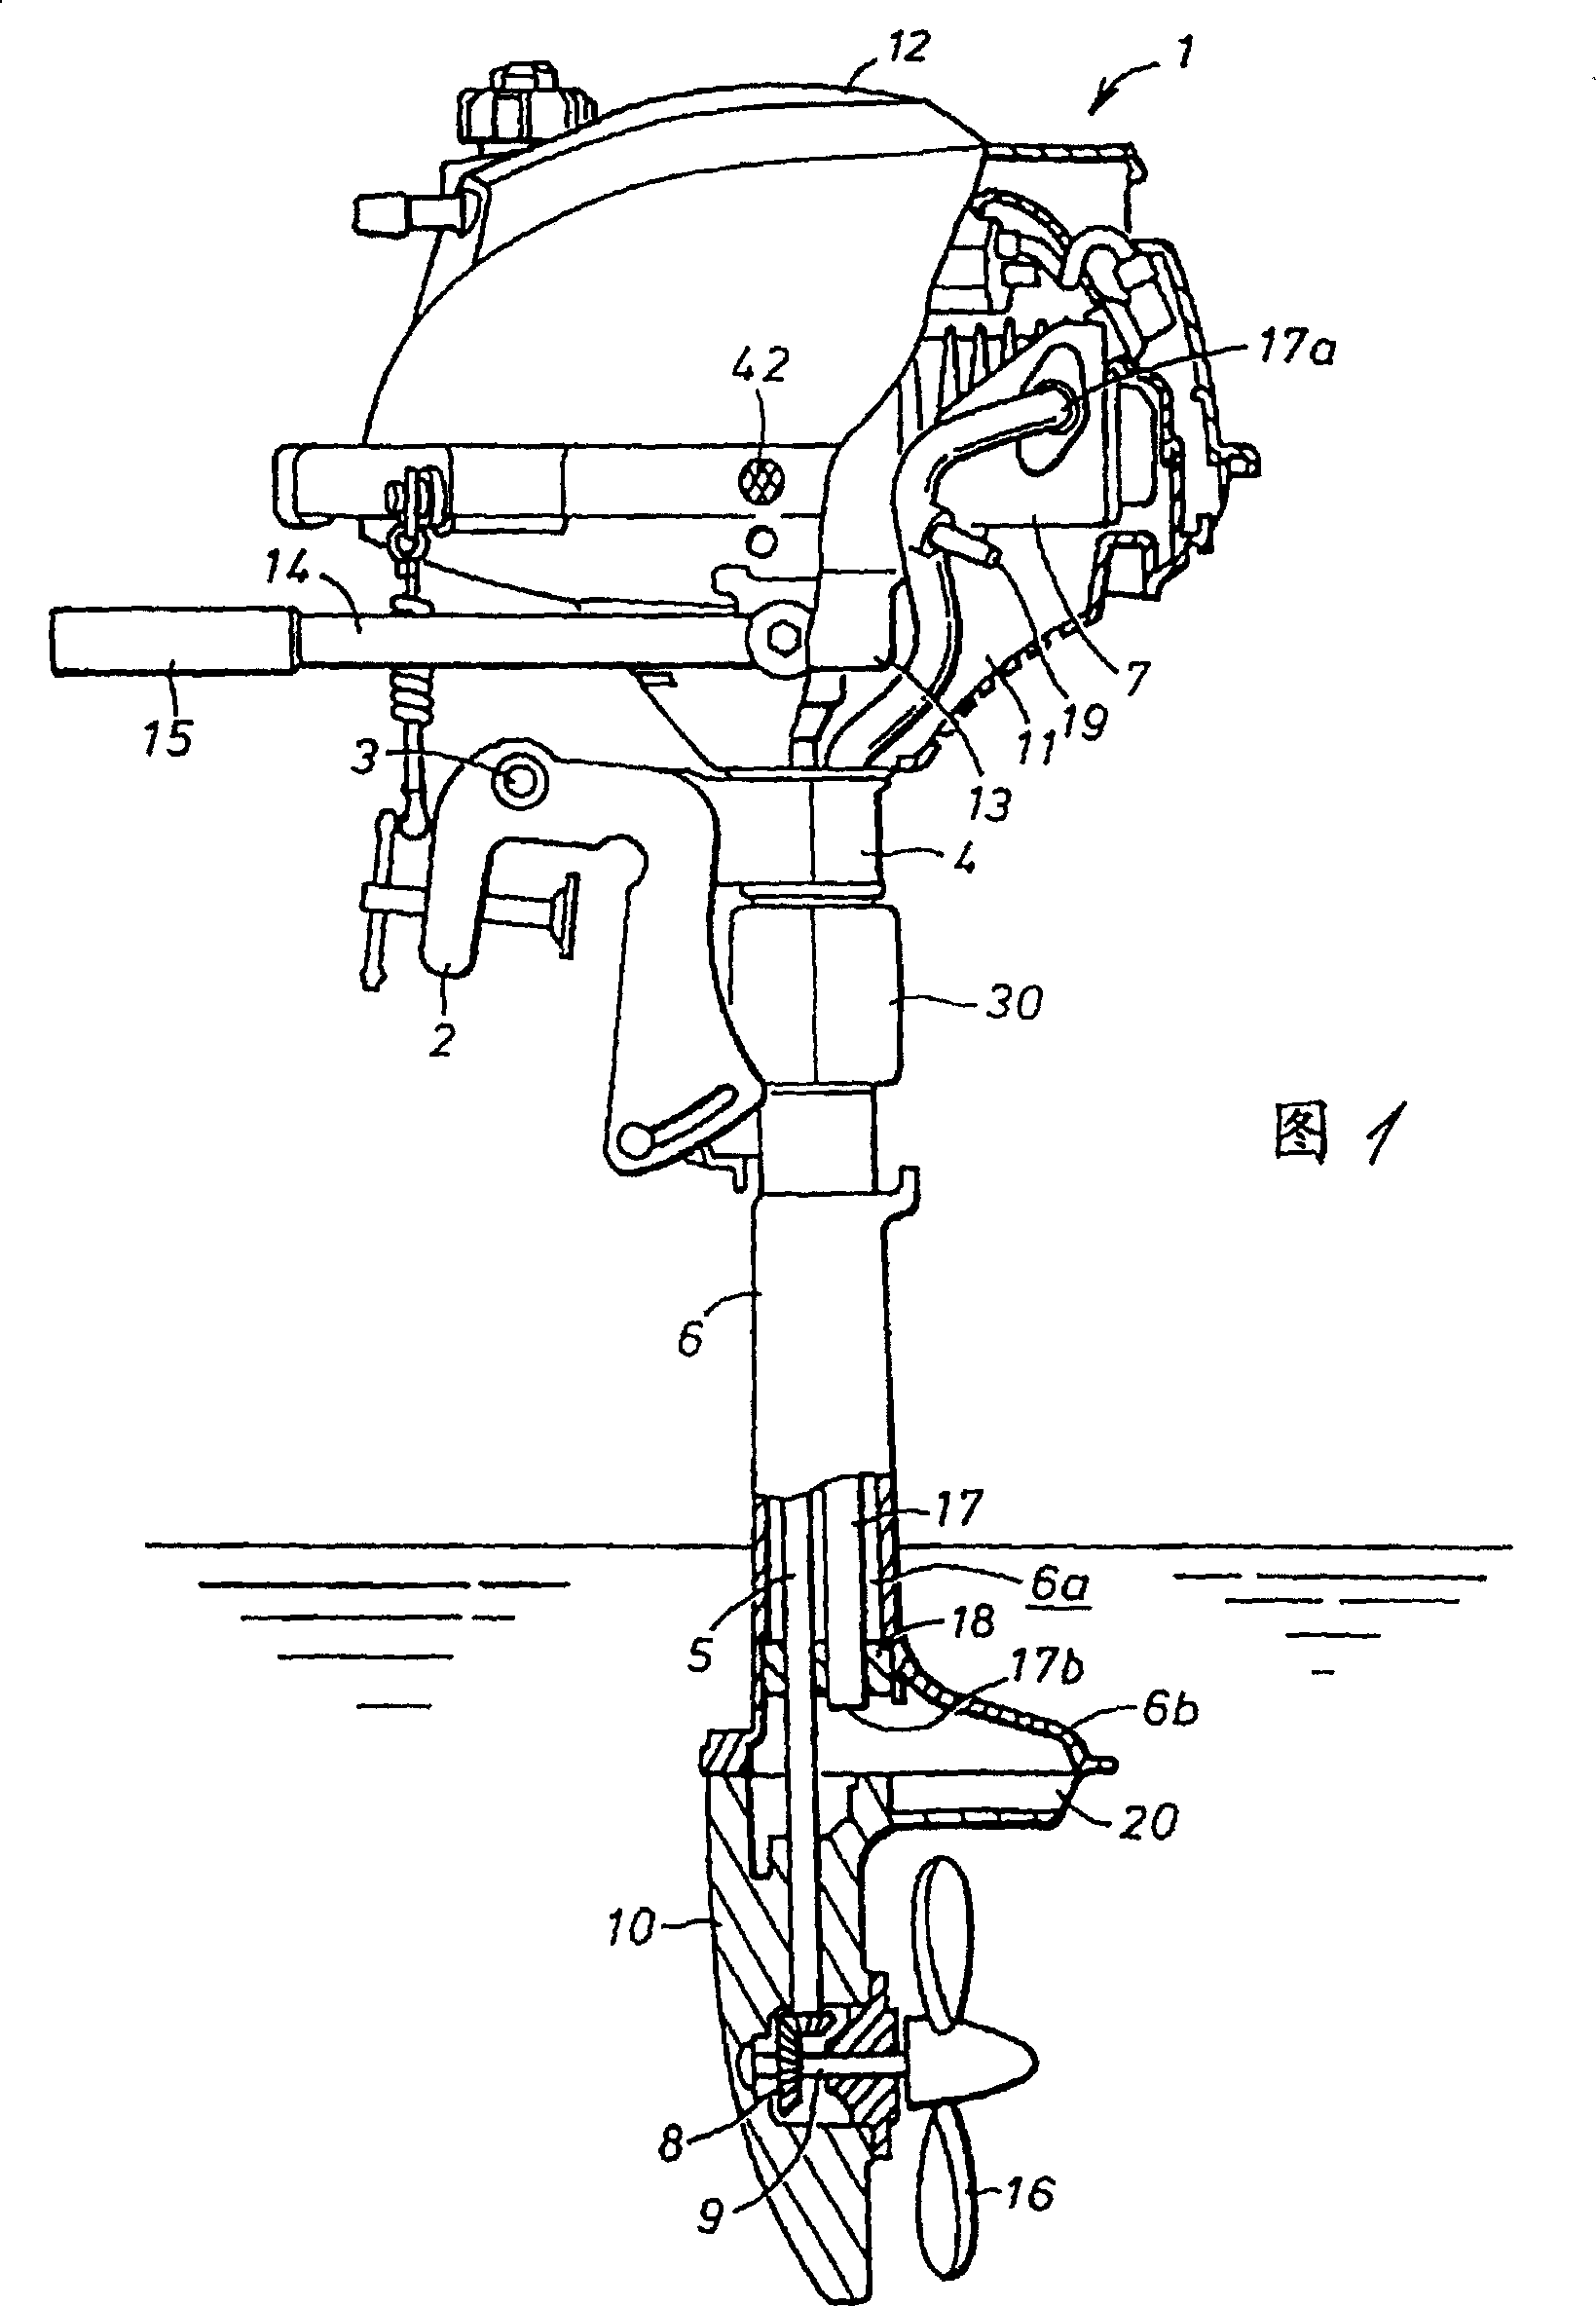 Exhaust arrangement for outboard marine drive engine